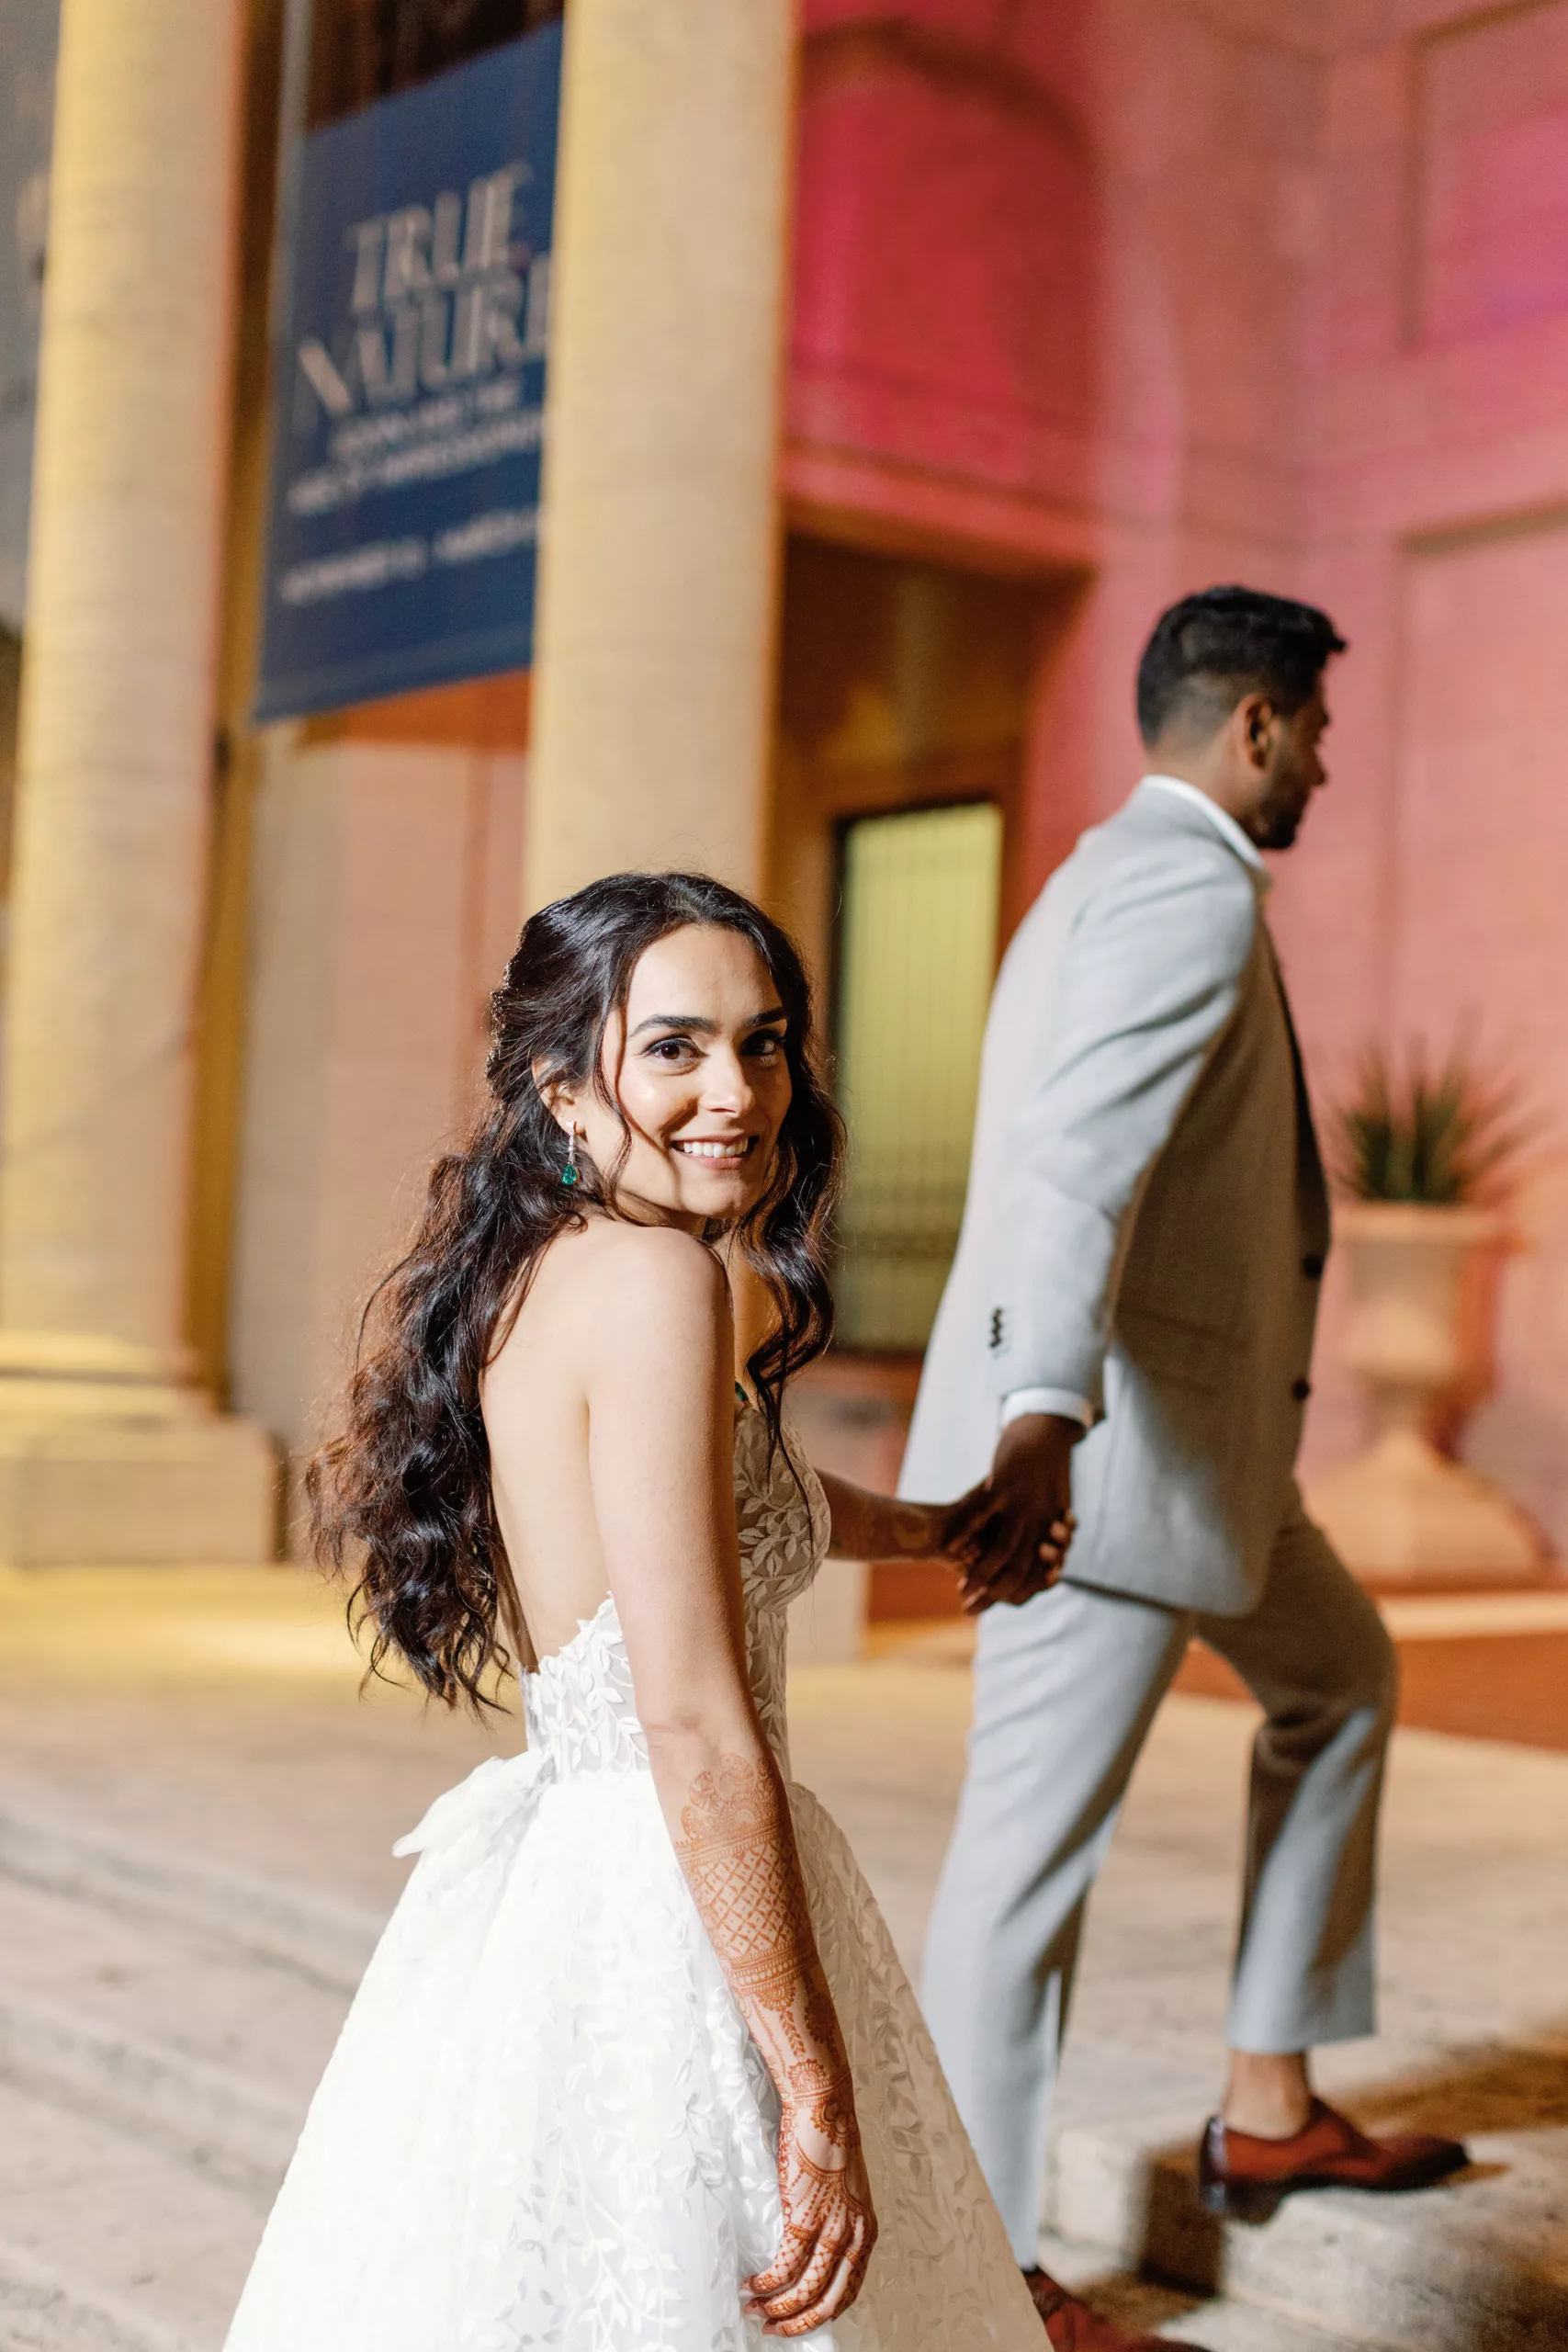 Indian Wedding Bridal Henna Inspiration | Elegant Hair and Makeup Ideas | Tampa Bay Hair and Makeup Artist Michele Renee The Studio